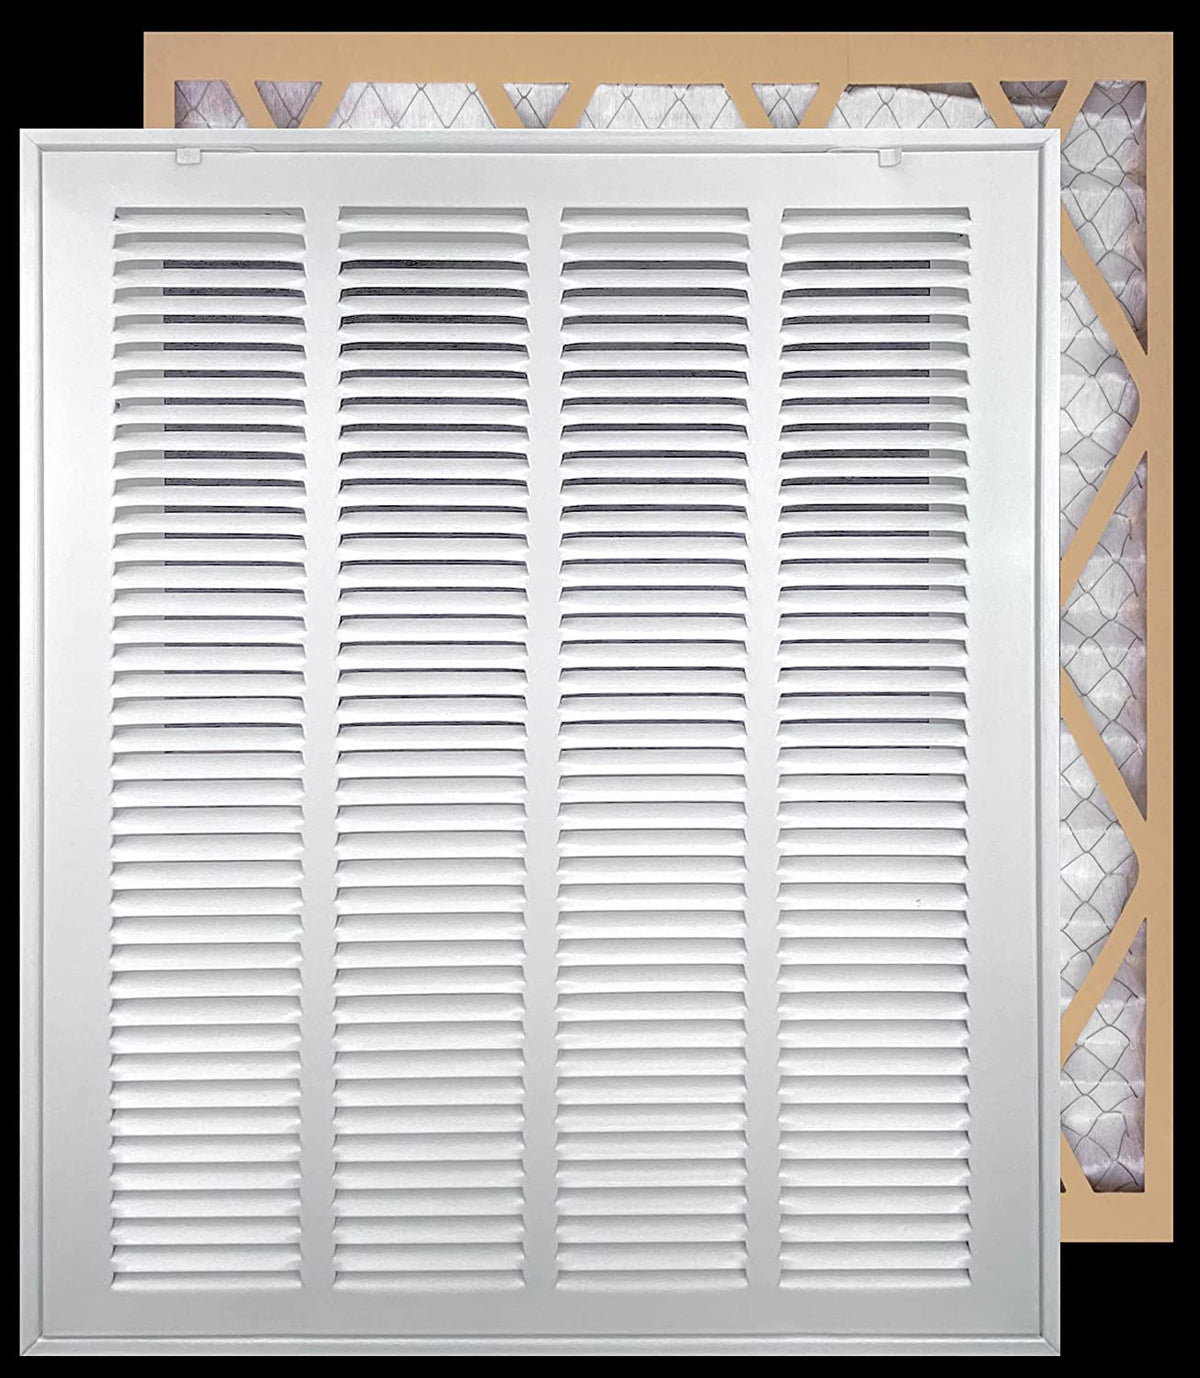 airgrilles 18" x 22" duct opening   filter included hd steel return air filter grille for sidewall and ceiling fil-7rafg1-wh-18x22 756014653052 - 1